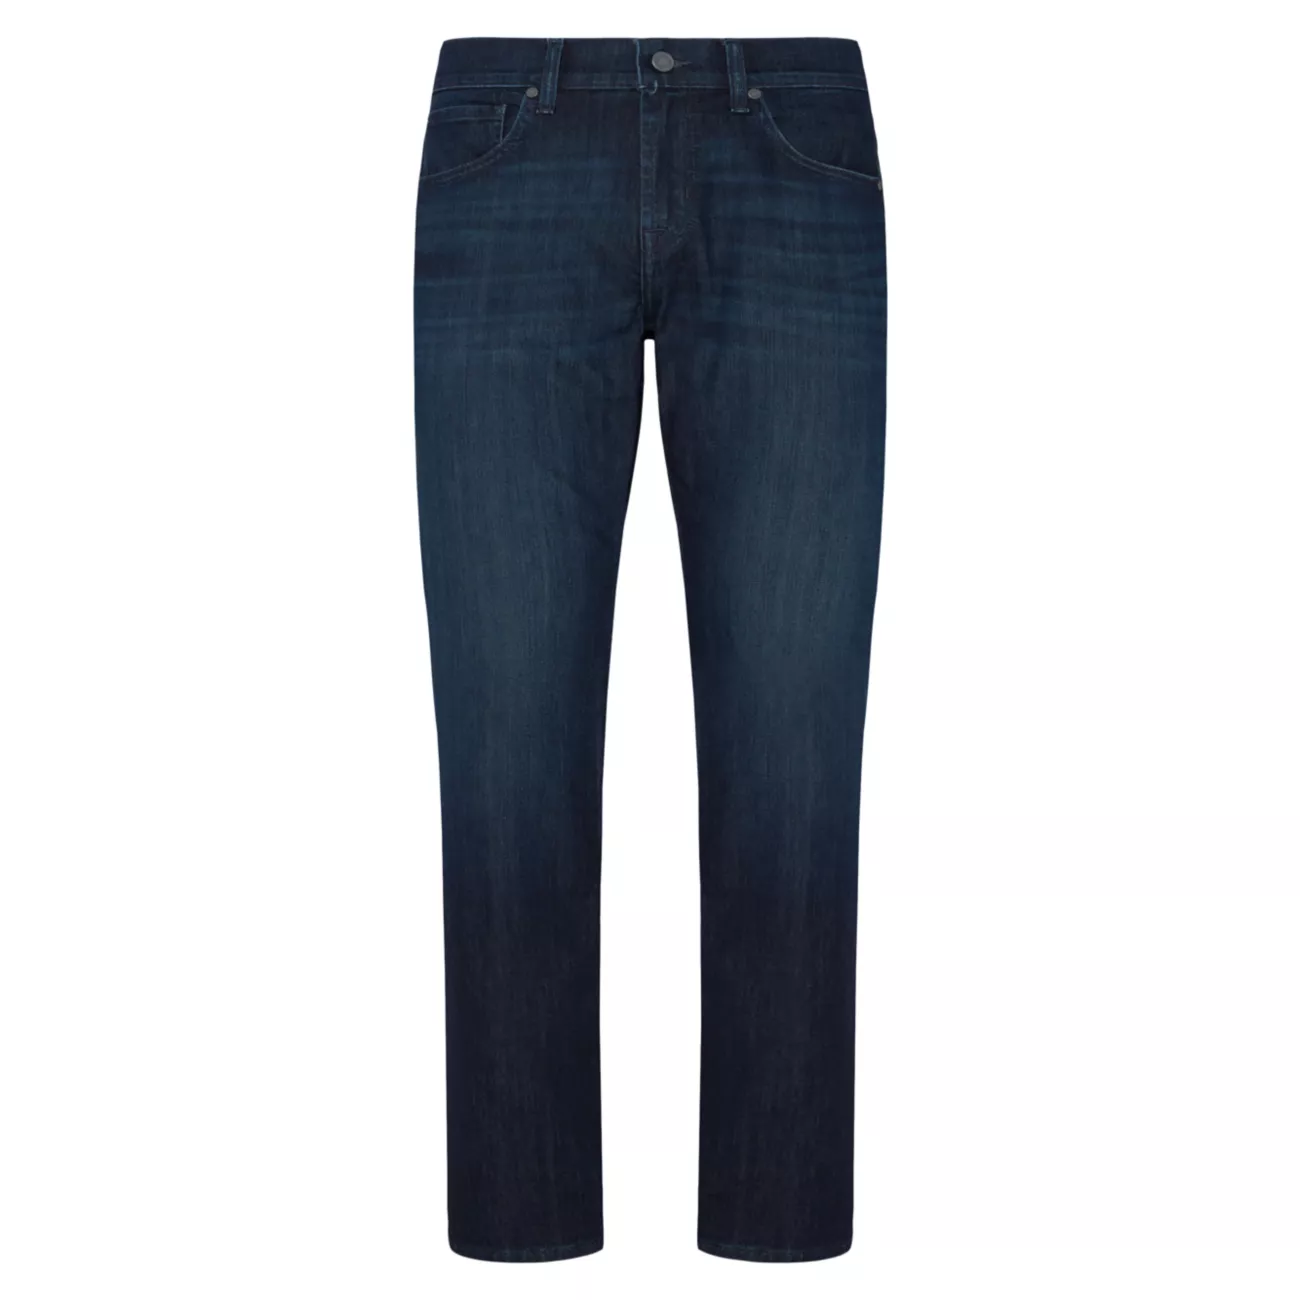 Cotton-Blend Straight-Leg Jeans 7 For All Mankind